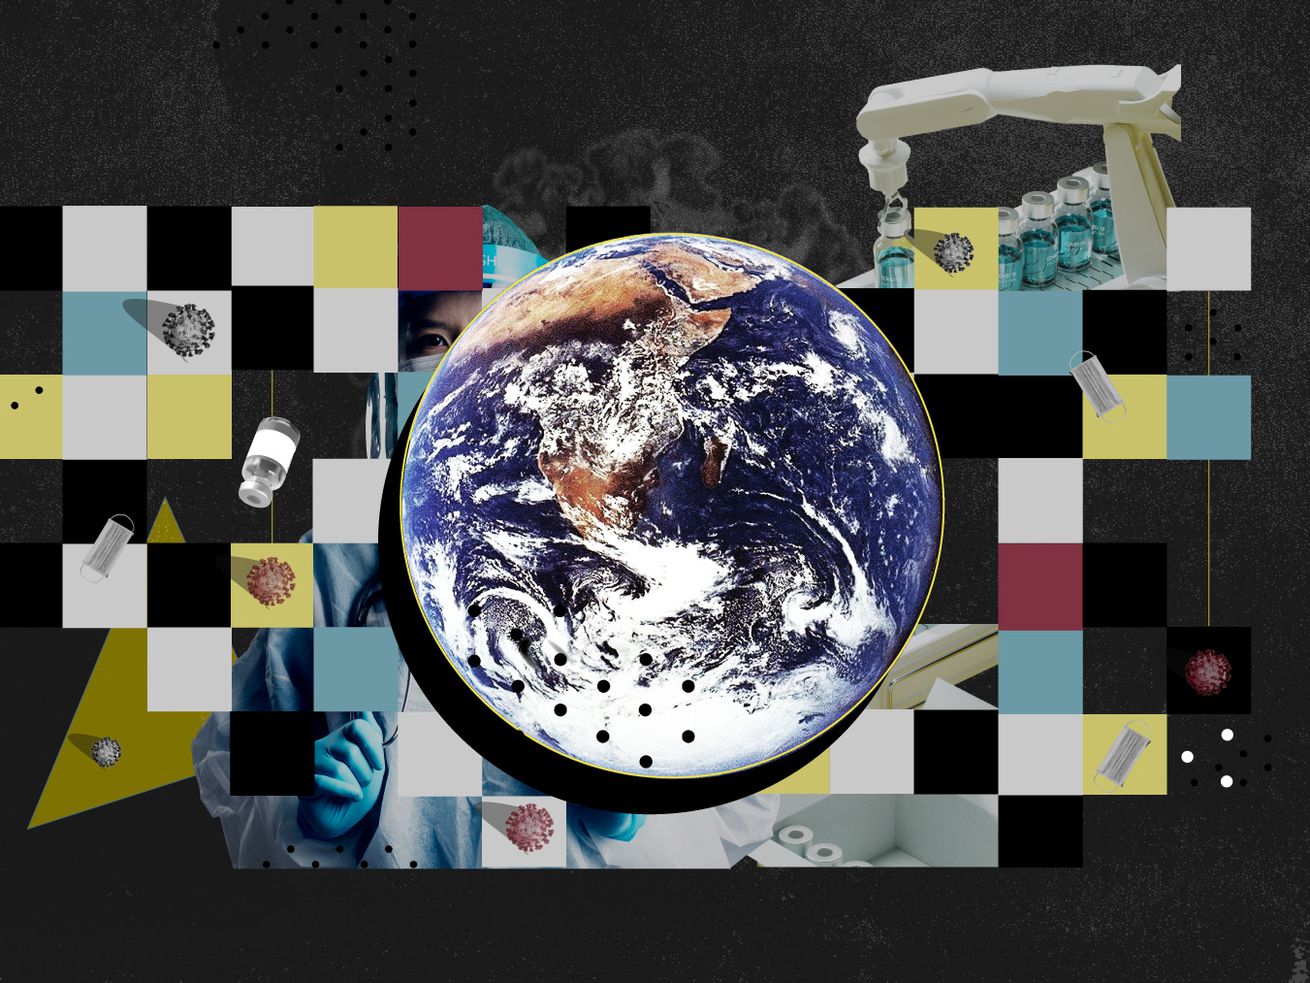 A photo collage of the earth from space against a checkered background with pandemic related imagery.